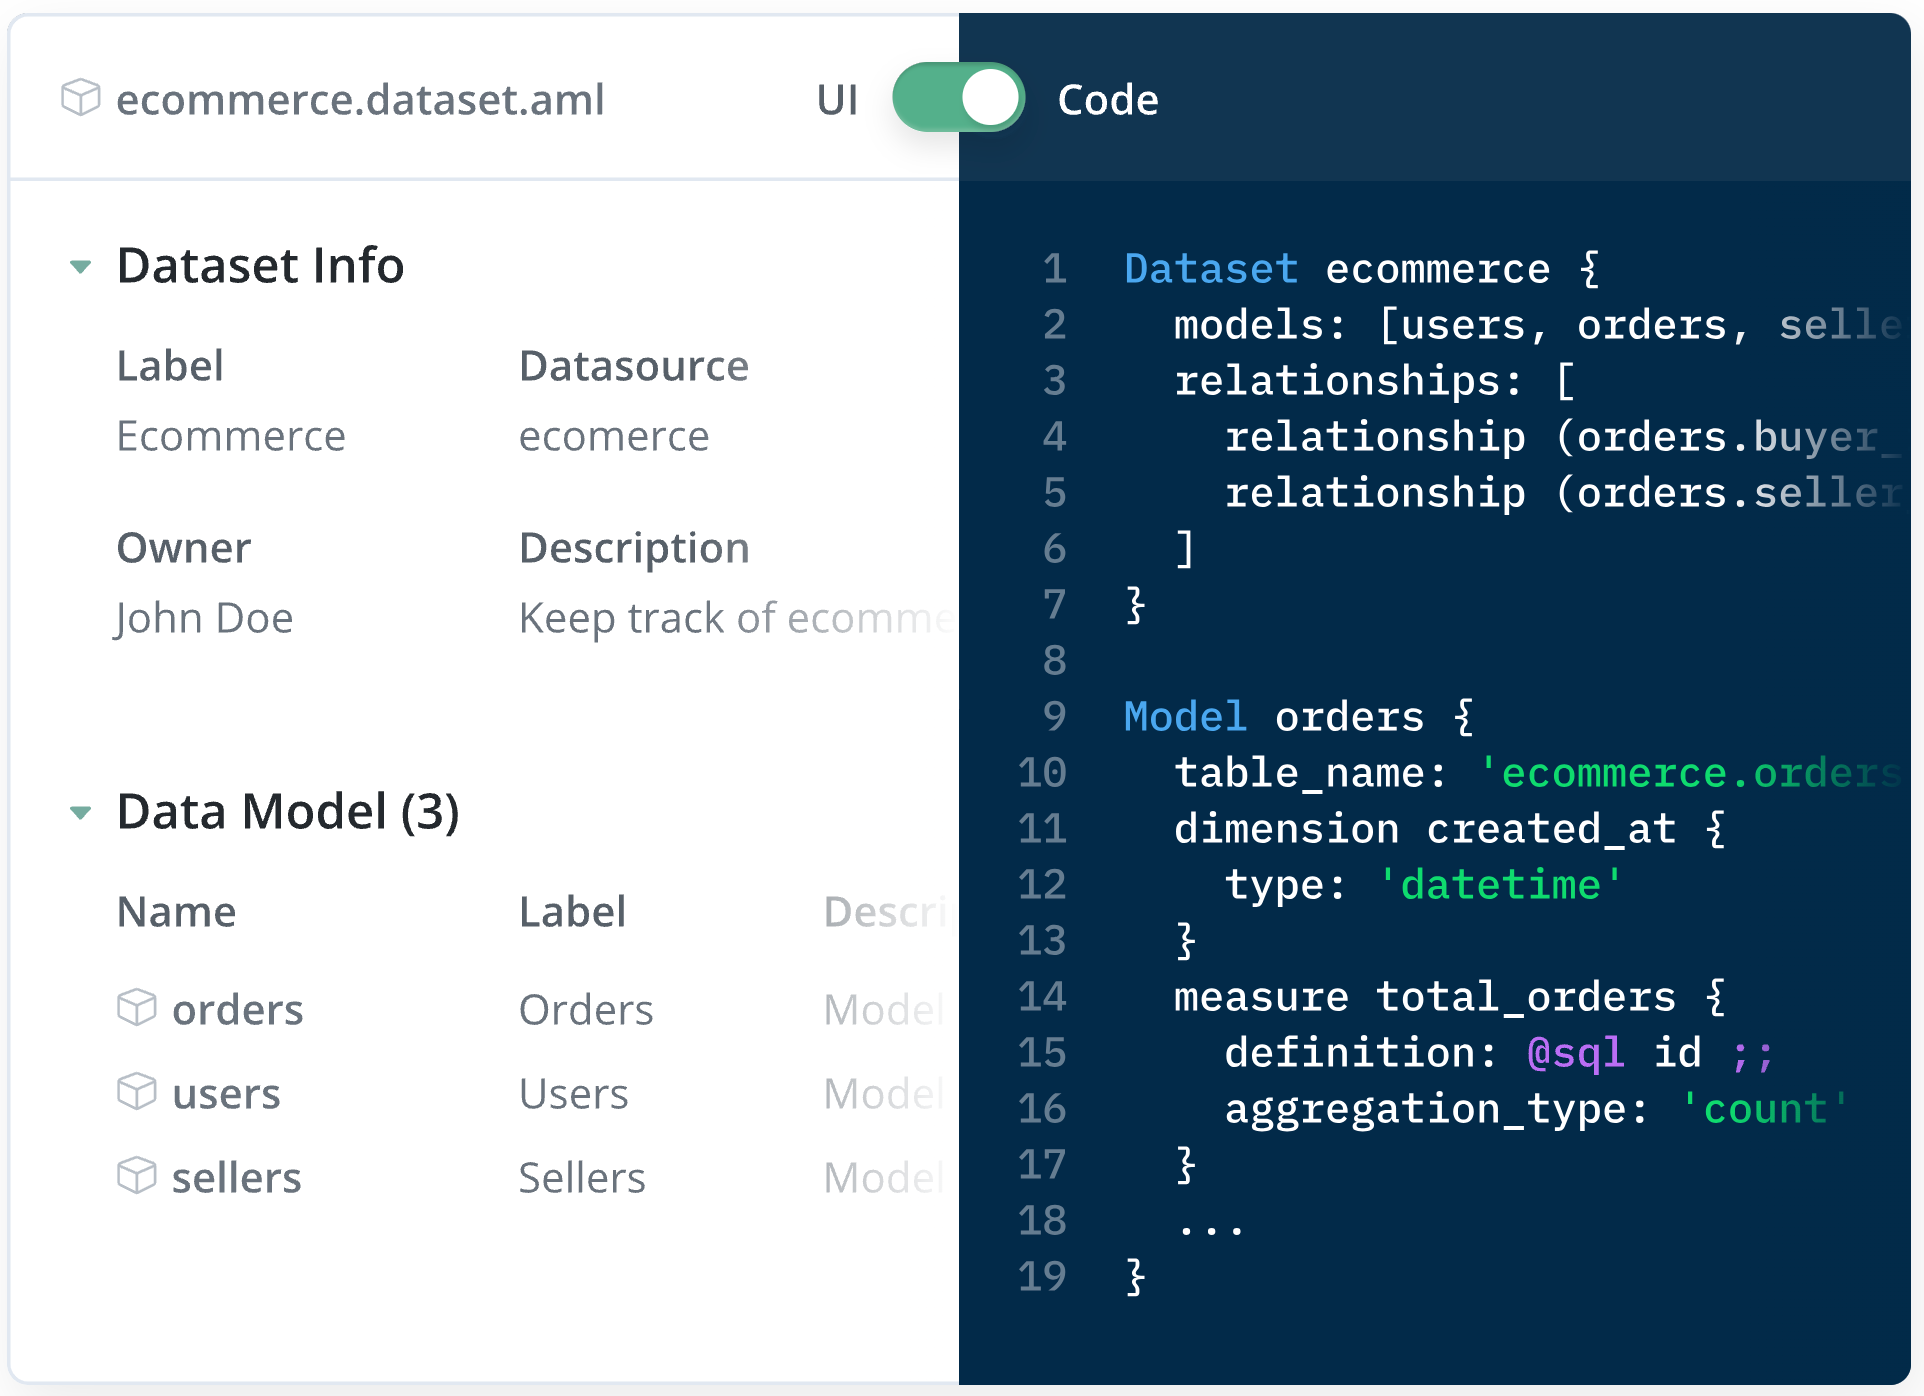 Use Both UI and Code View For Modeling: Use UI view to easily build new models or understand how a model works.  Use Code view when analysts need to copy and paste the entire code from one model to another, without having to start from scratch.